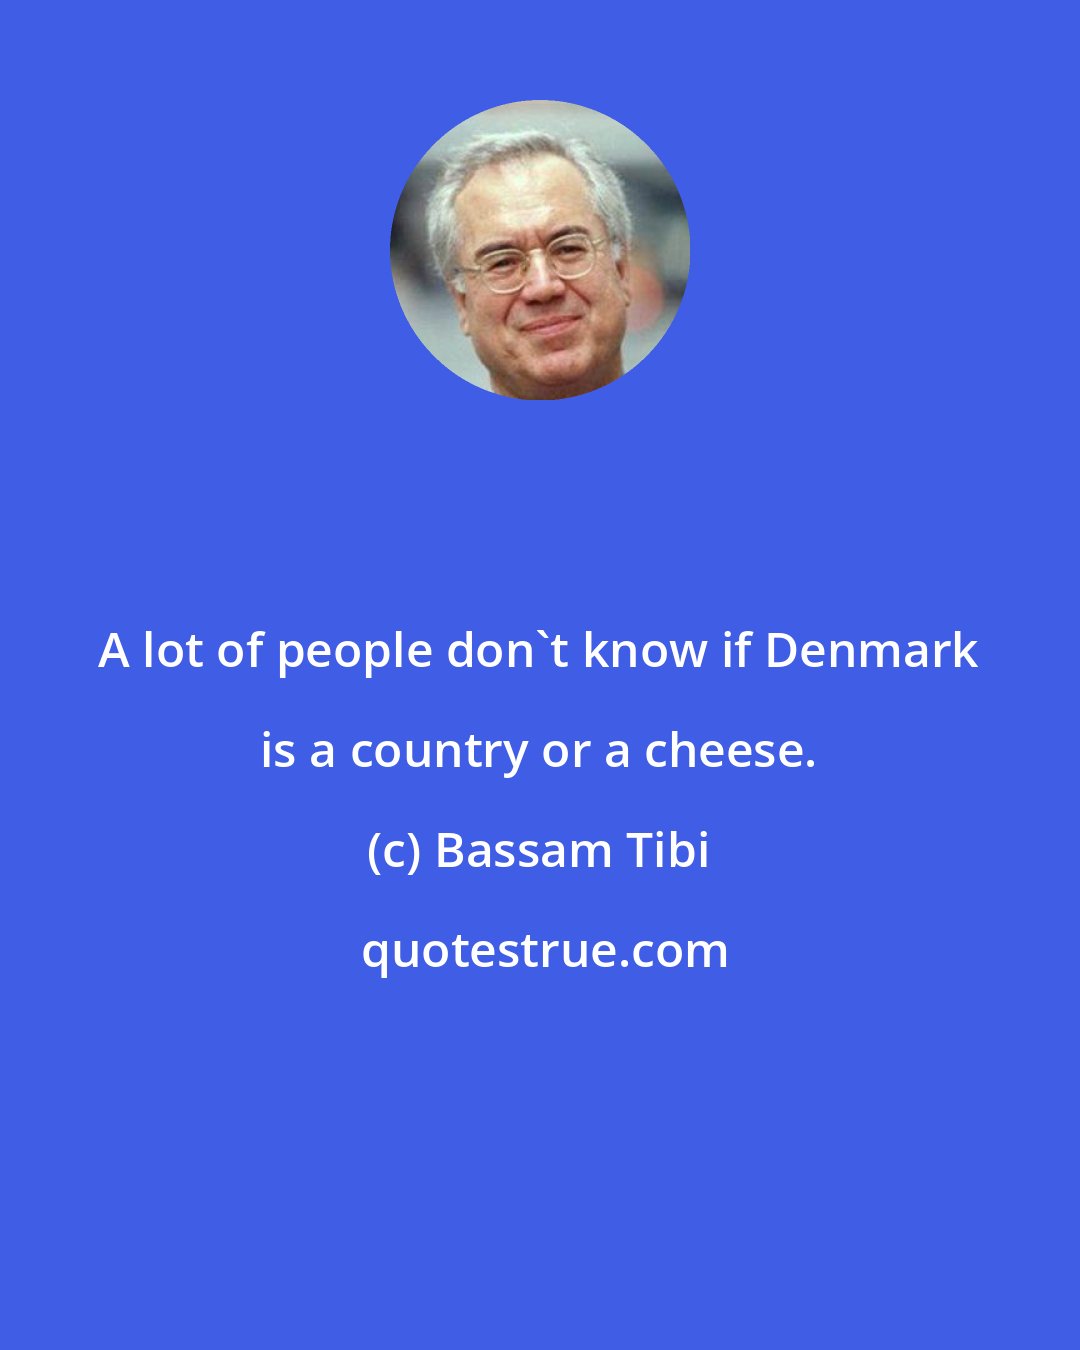 Bassam Tibi: A lot of people don't know if Denmark is a country or a cheese.